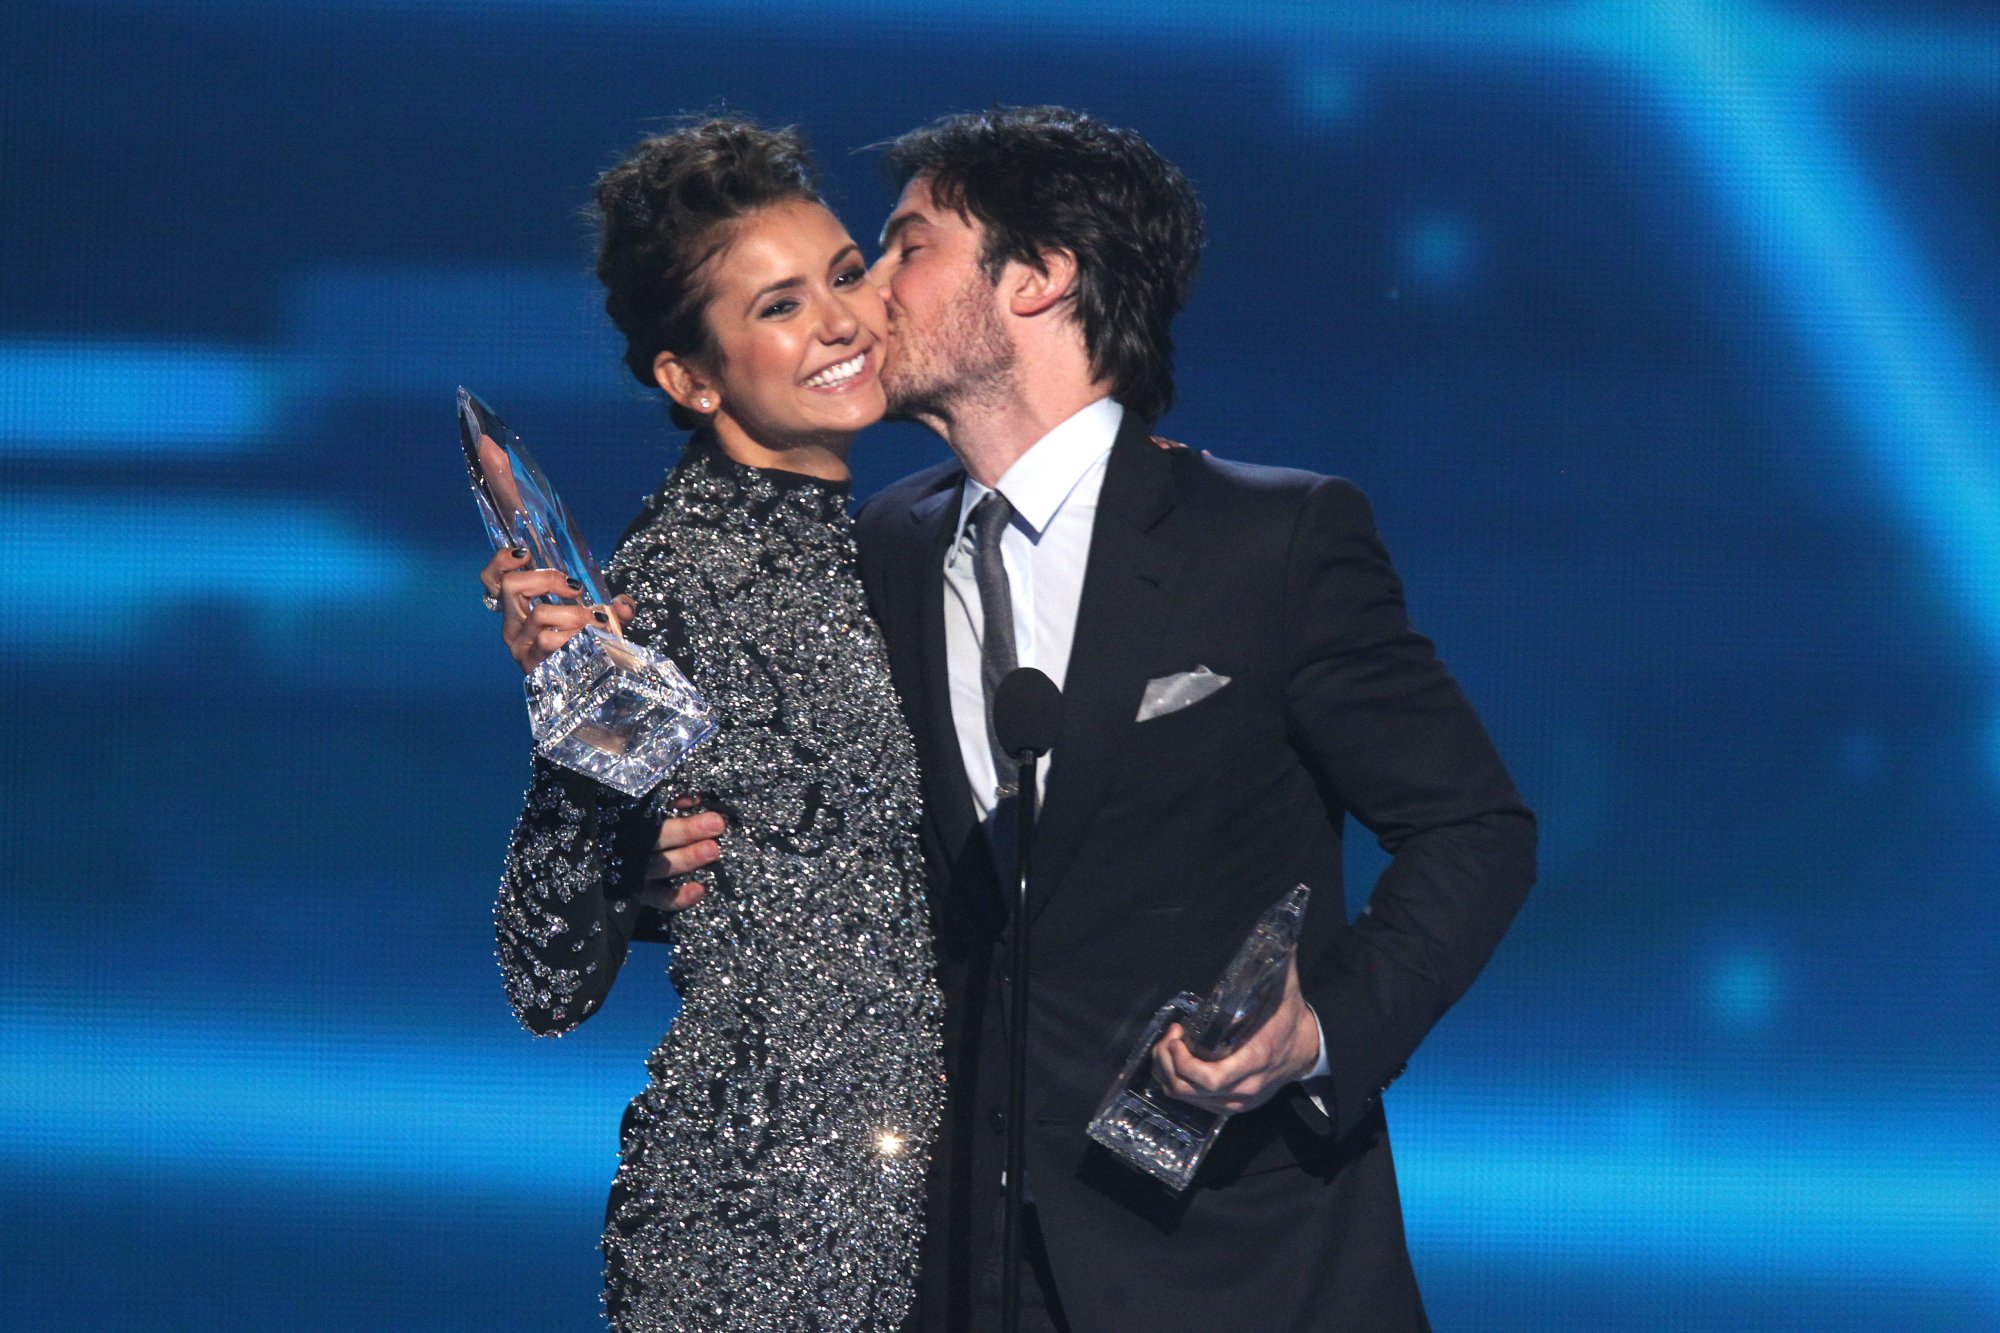 Ian Somerhalder kisses his 'The Vampire Diaries' co-star, Nina Dobrev, on the cheek while accepting a People's Choice Award. Somerhalder wears a black suit over a white button-up shirt and gray tie. Dobrev wears a diamond studded long-sleeved dress.